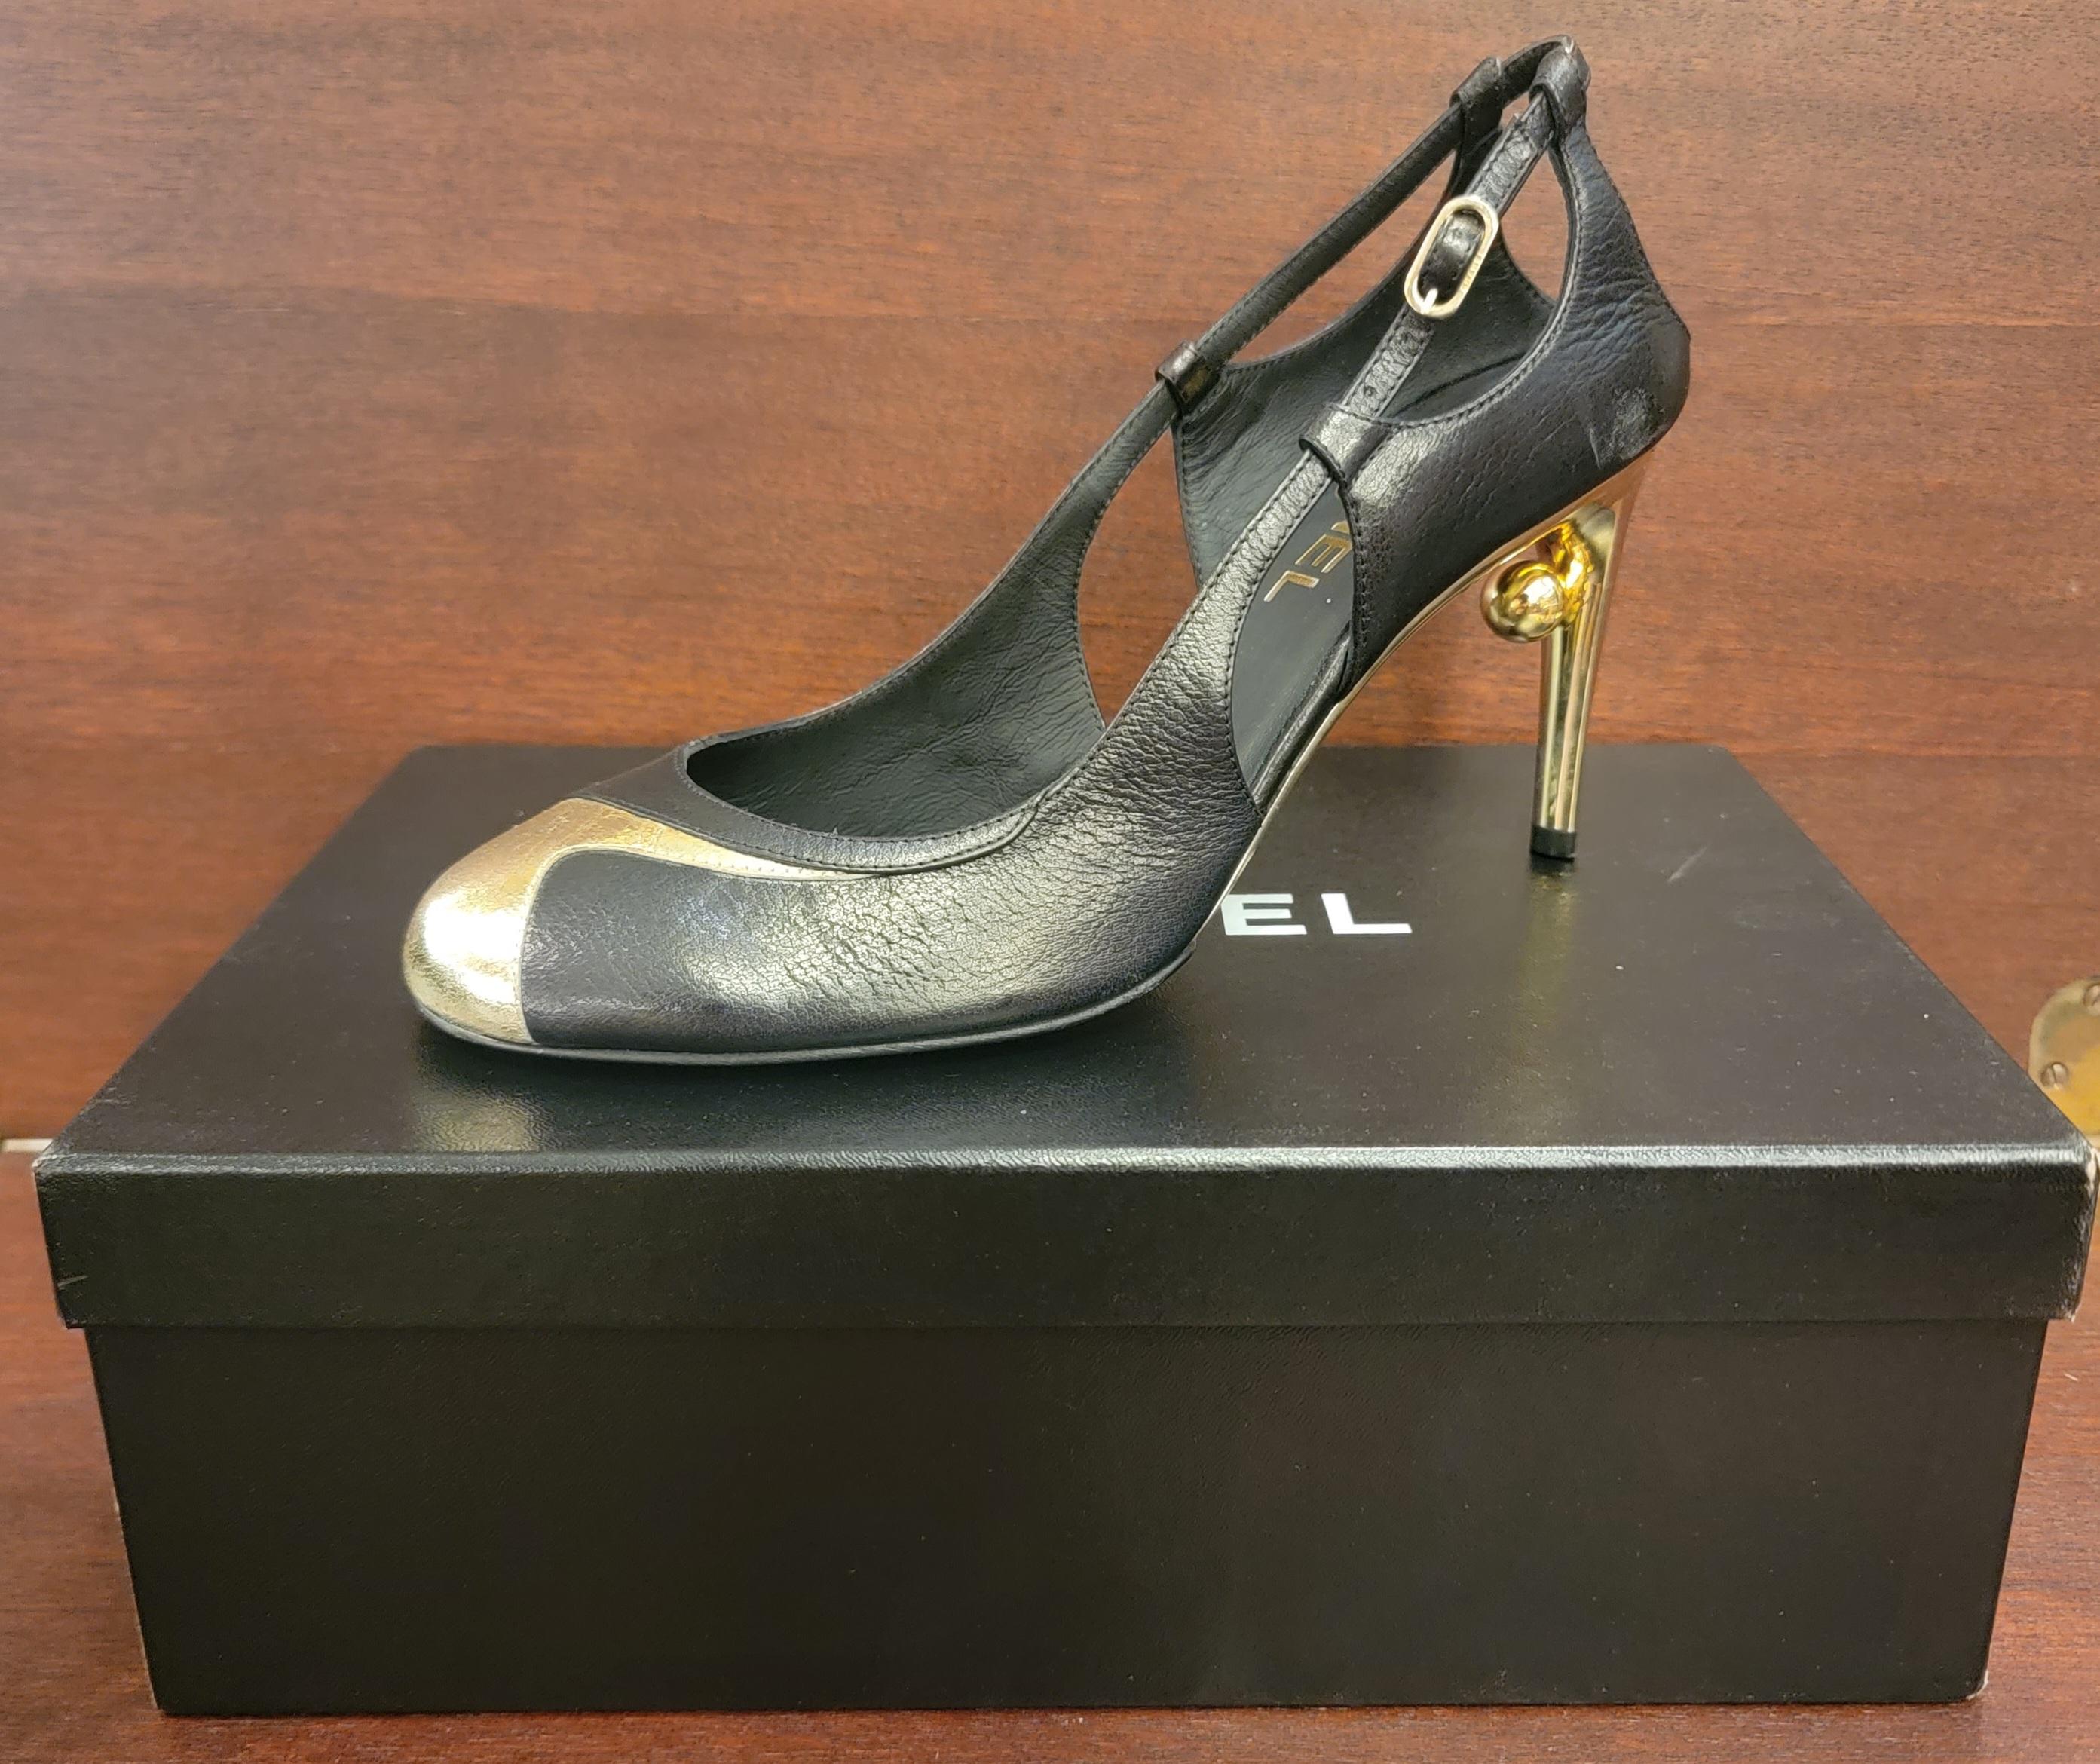 Authentic Chanel Size 38.5 Leather High Heel Shoes W/Gold Accents In Good Condition For Sale In Pasadena, CA